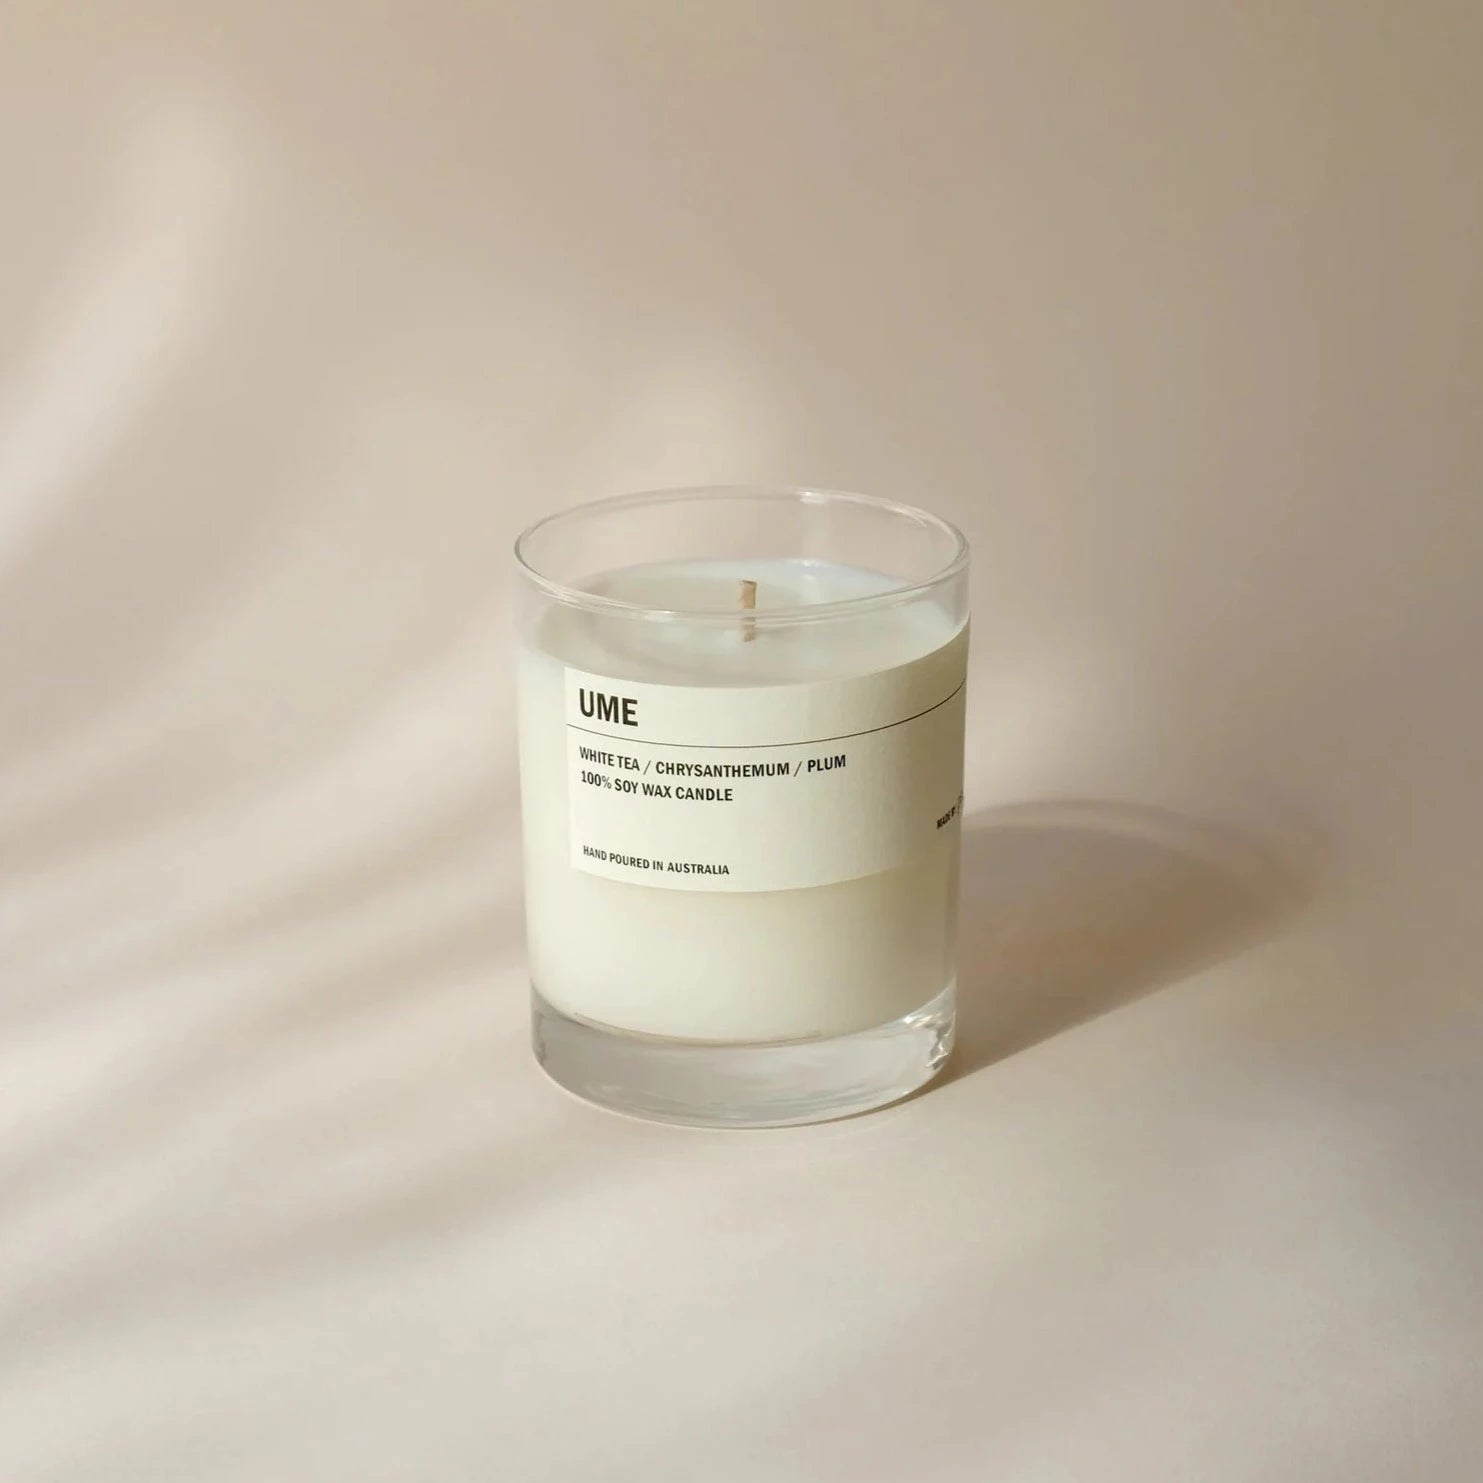 UME Soy Wax Candle by Posie